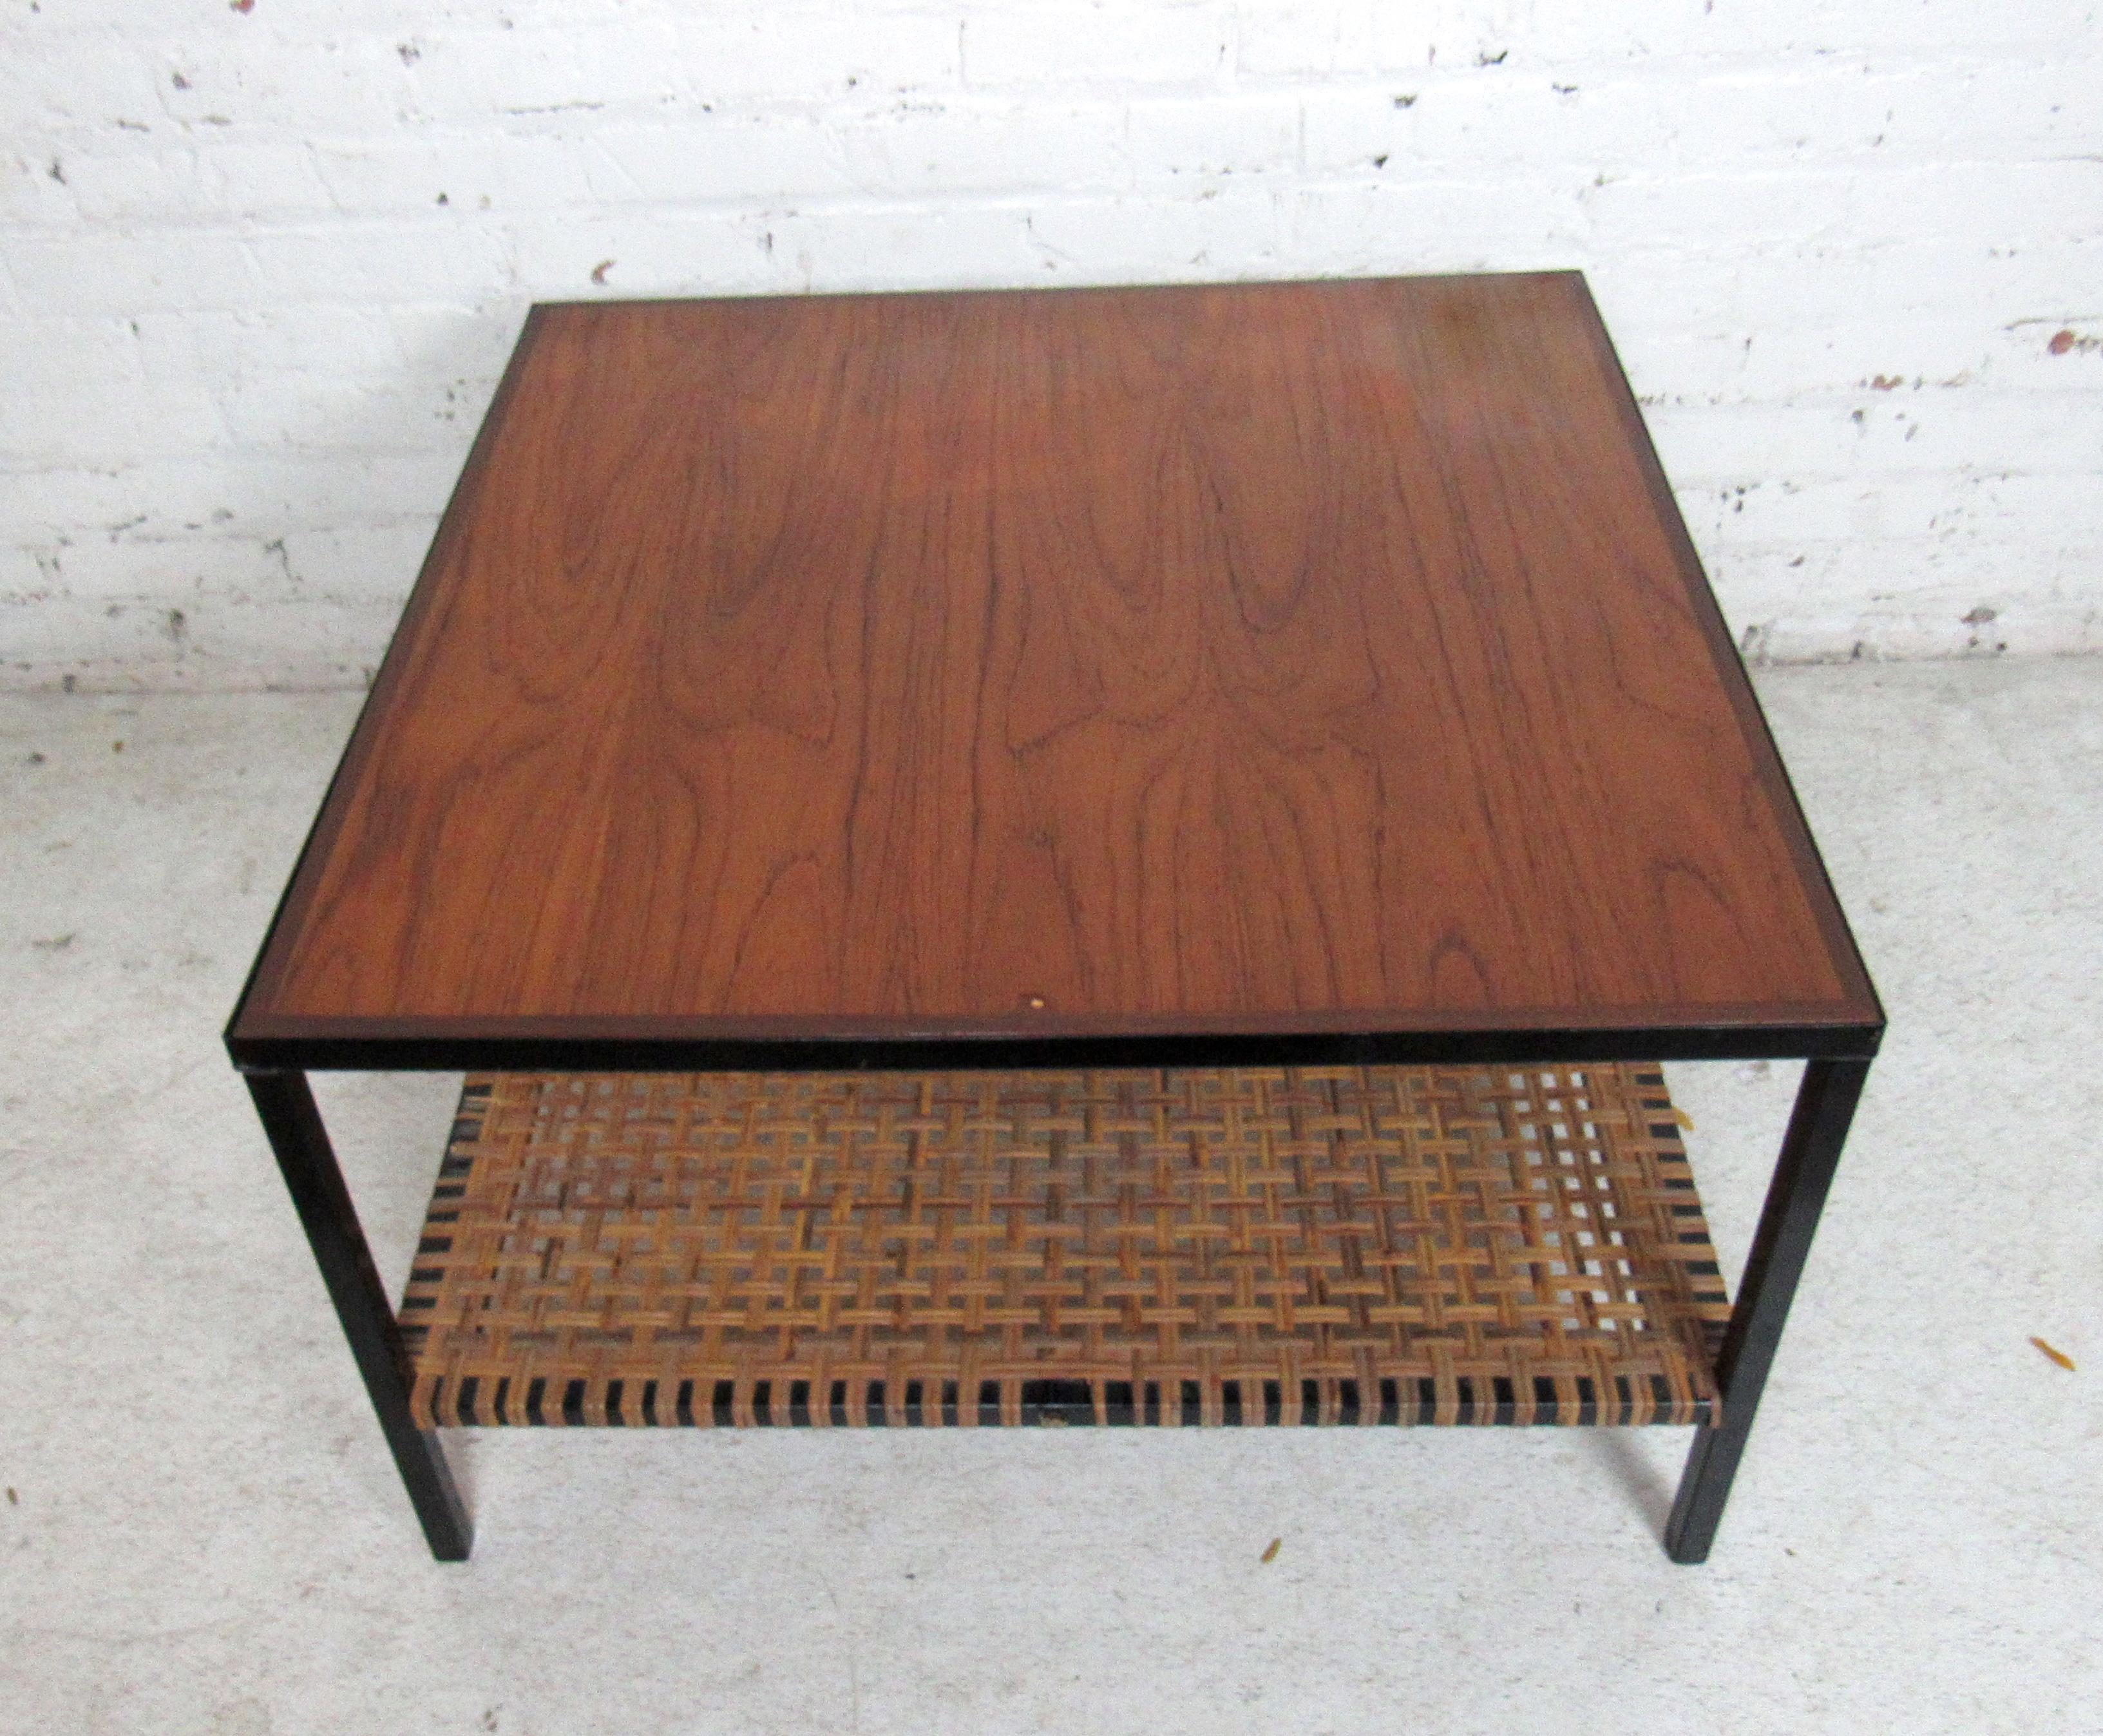 Industrial square coffee table featuring a wooden top tier and wicker bottom tier with a black iron metal frame.

Please confirm item location (NY or NJ).